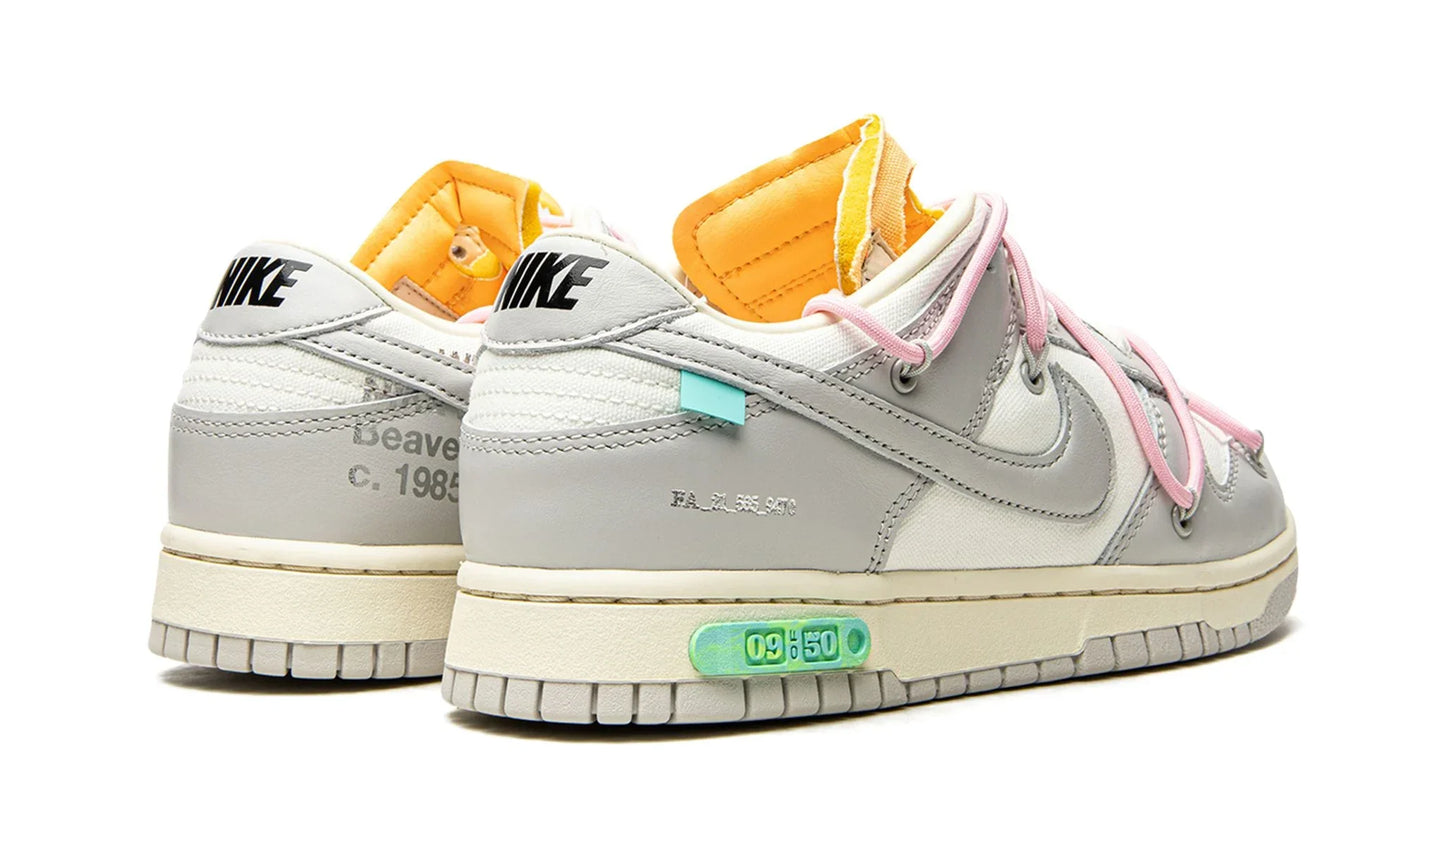 NIKE X OFF-WHITE DUNK LOW "Off-White - Lot 09"